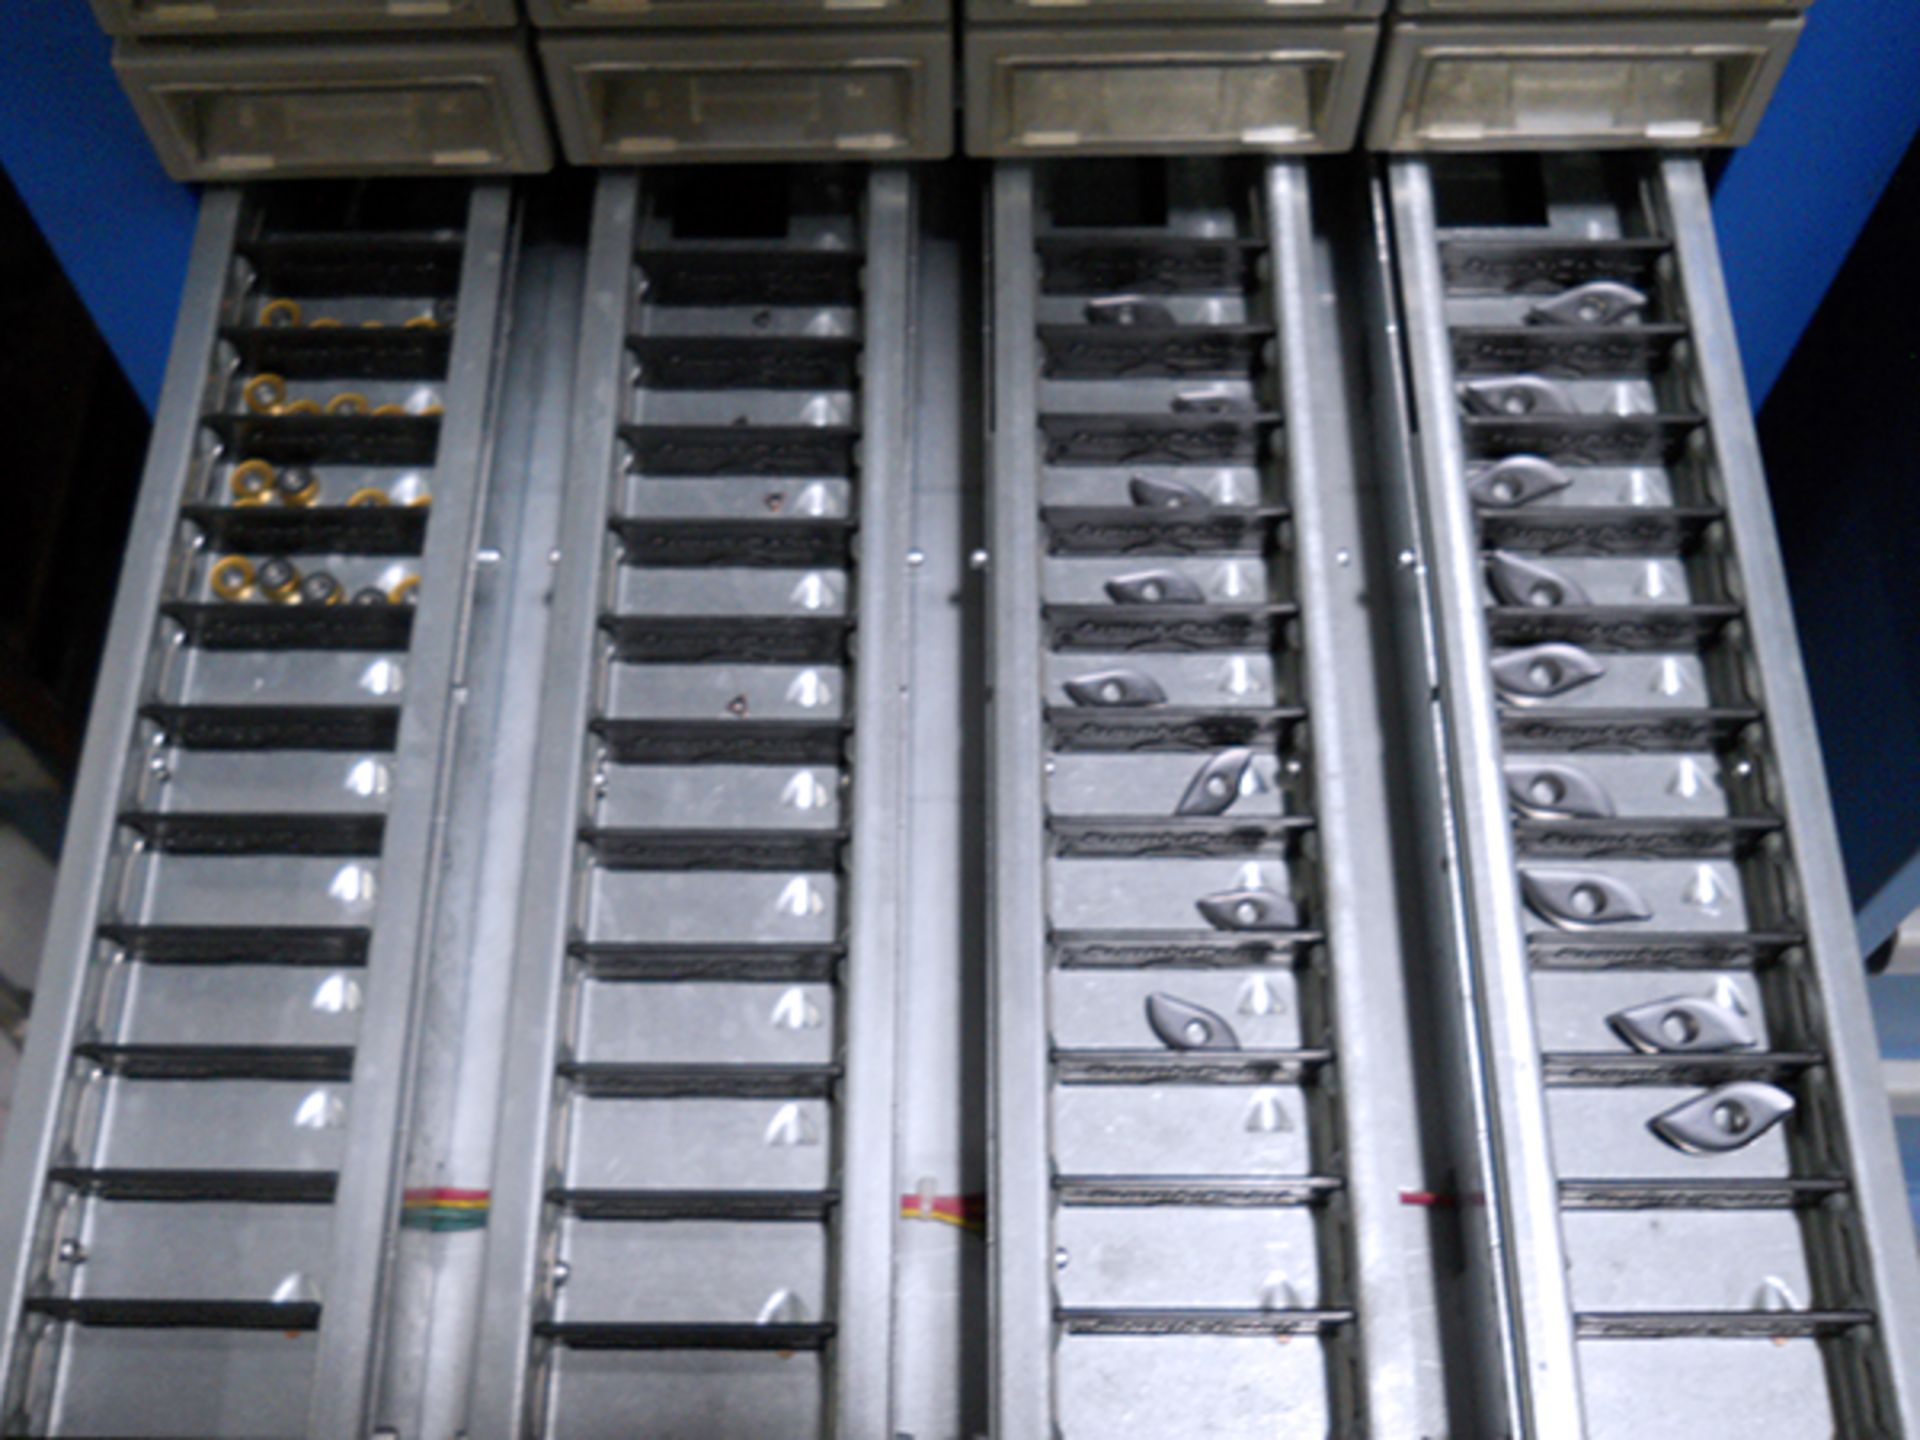 10 Drawer Lista Roller Bearing Cabinet with Contents - Image 32 of 44